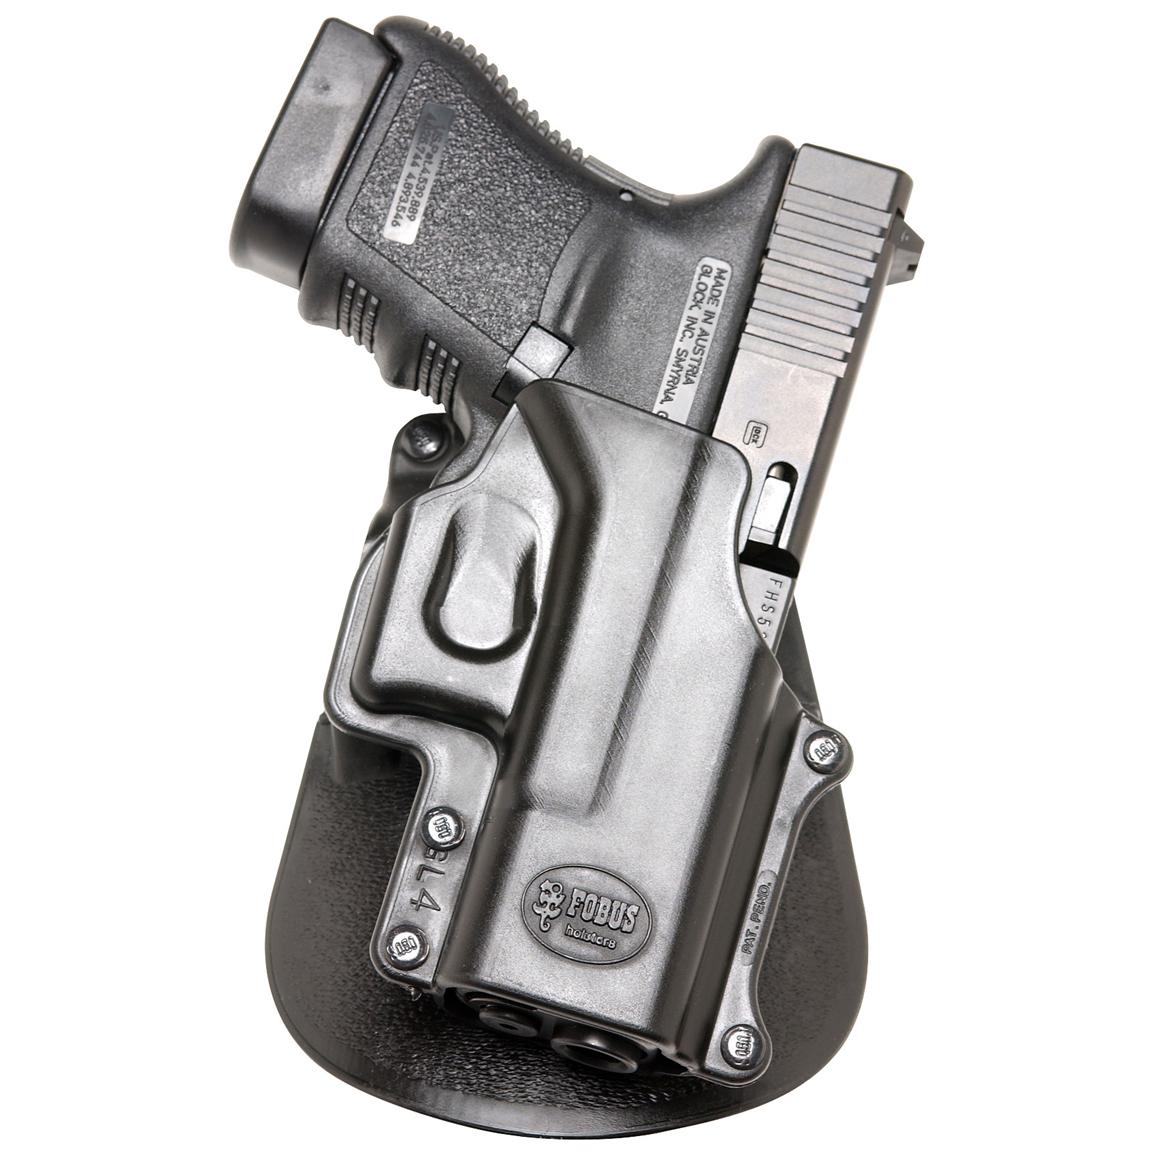 Fobus Glock 29/30/39 Holster with Double Mag Pouch 153318, Holsters